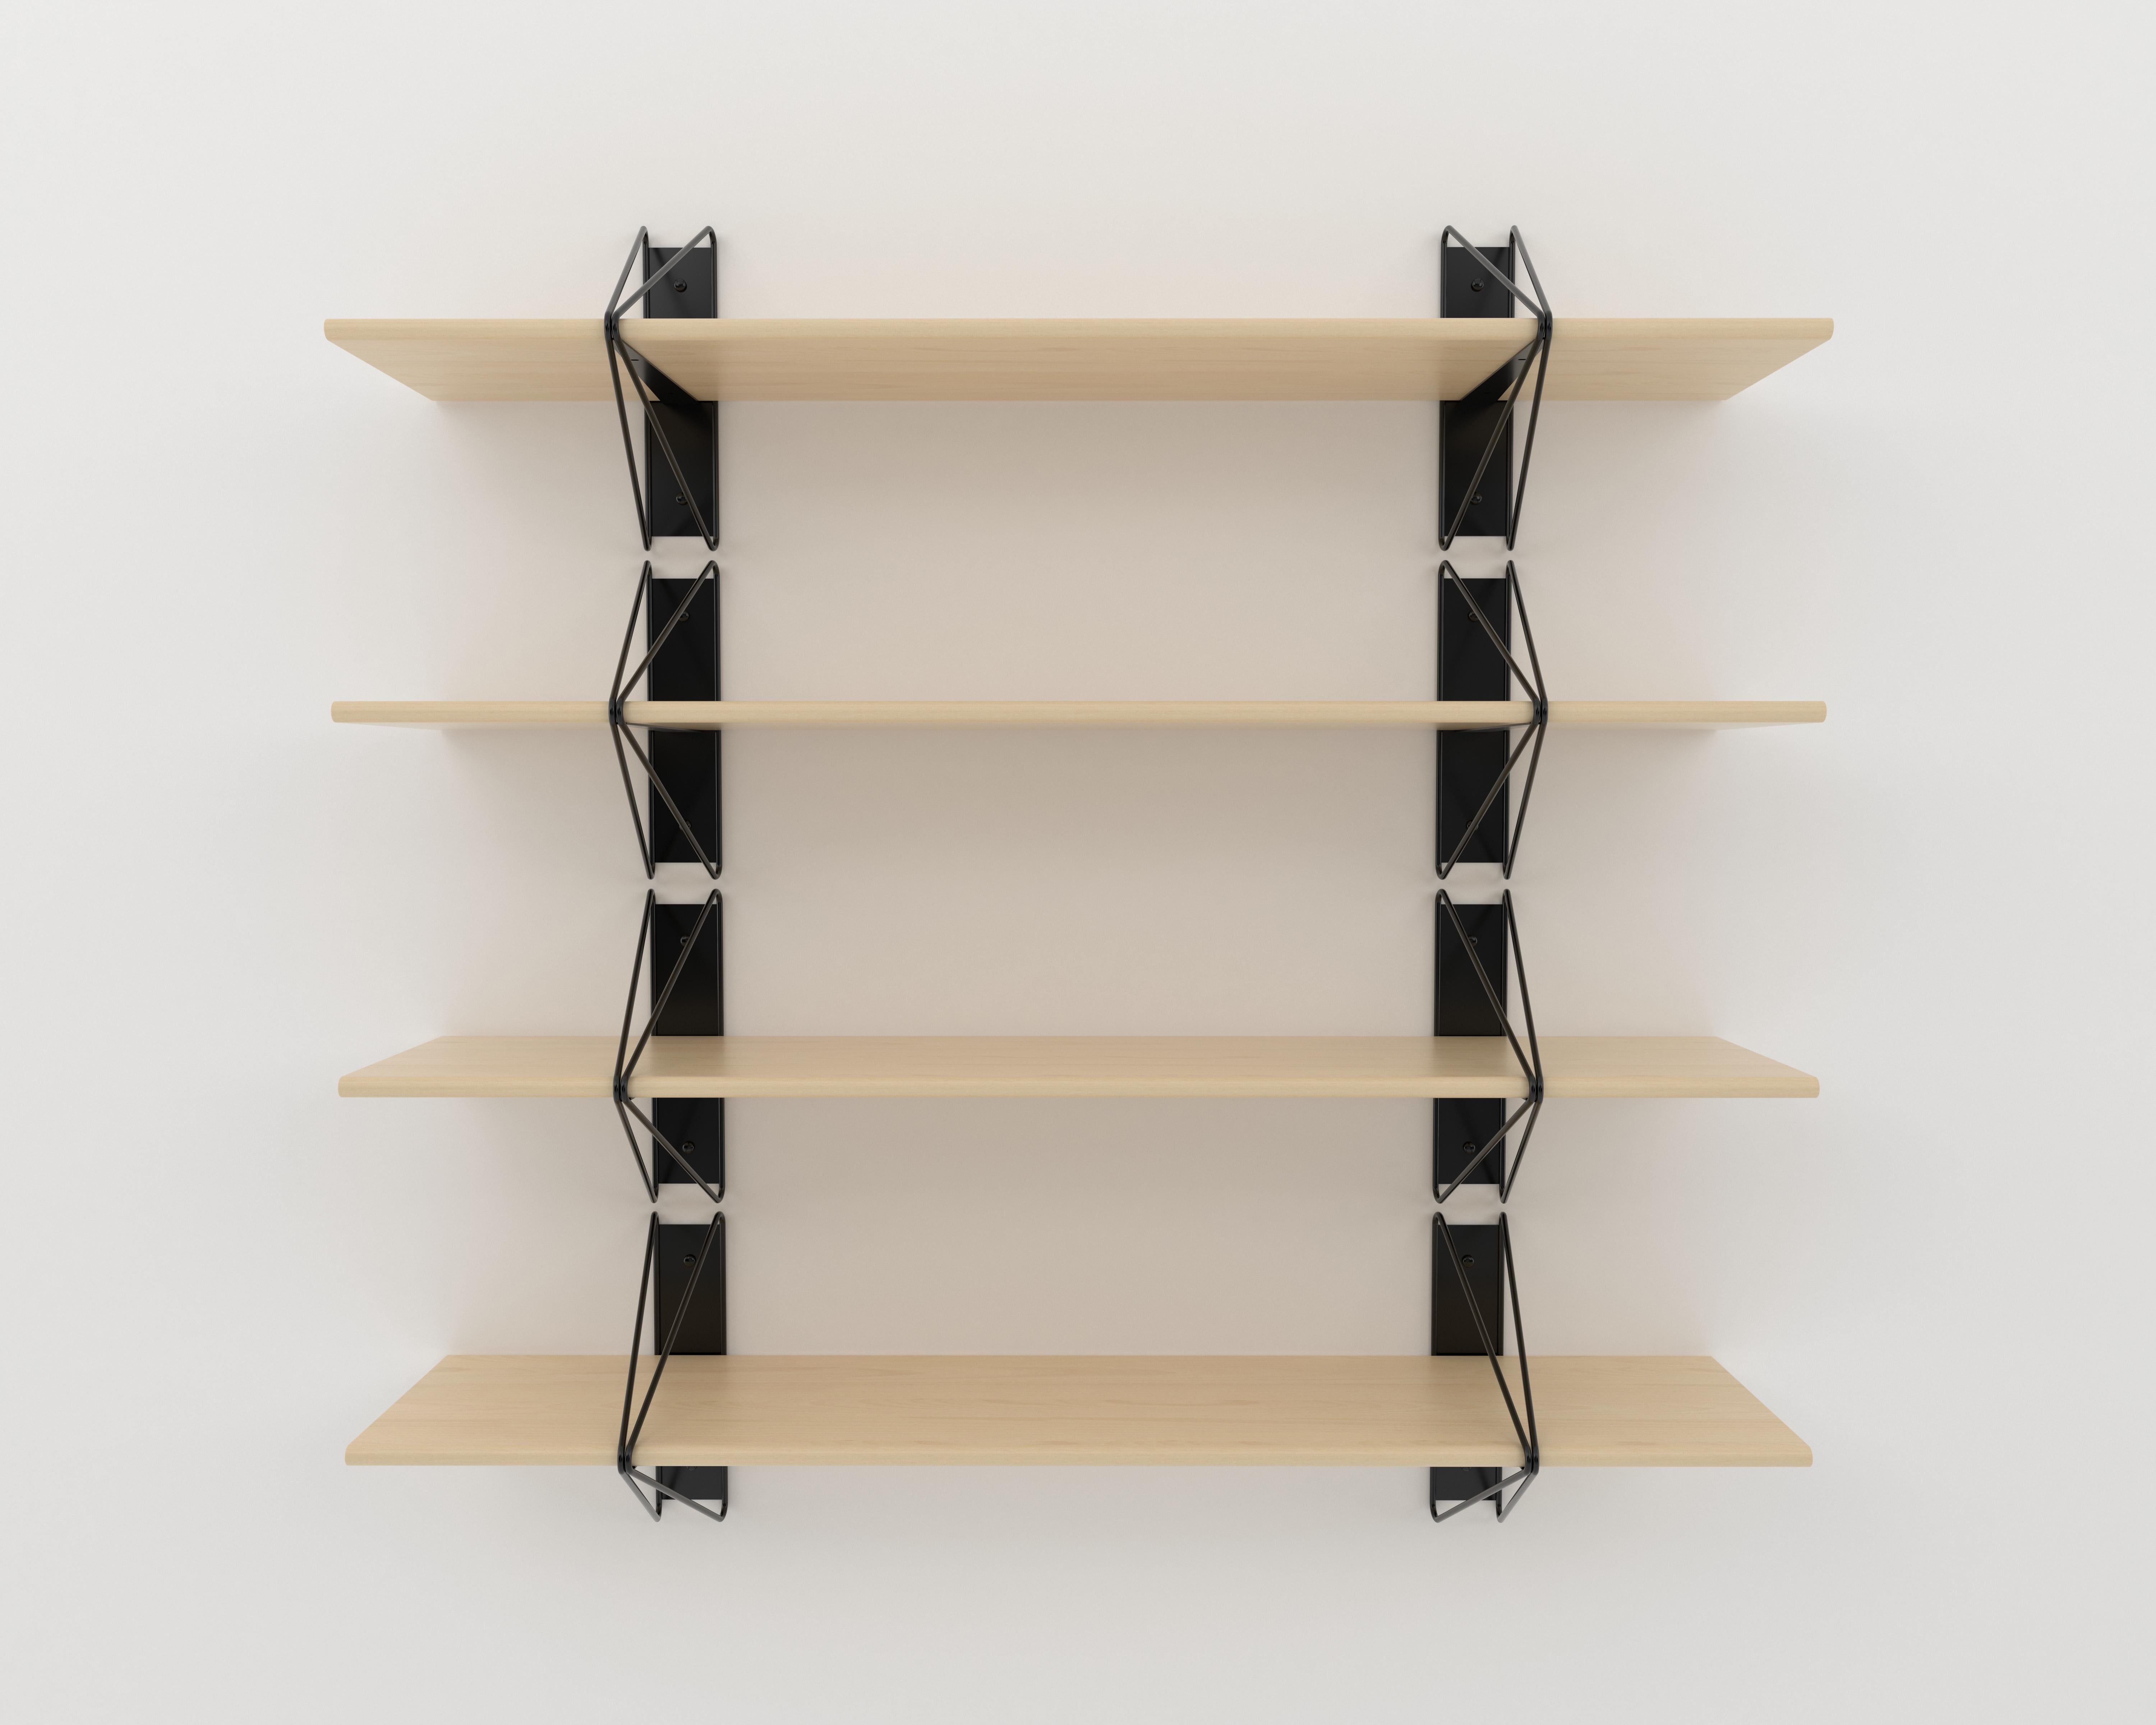 Oiled Set of 4 Strut Shelves from Souda, 84in, Black and Walnut, Made to Order For Sale